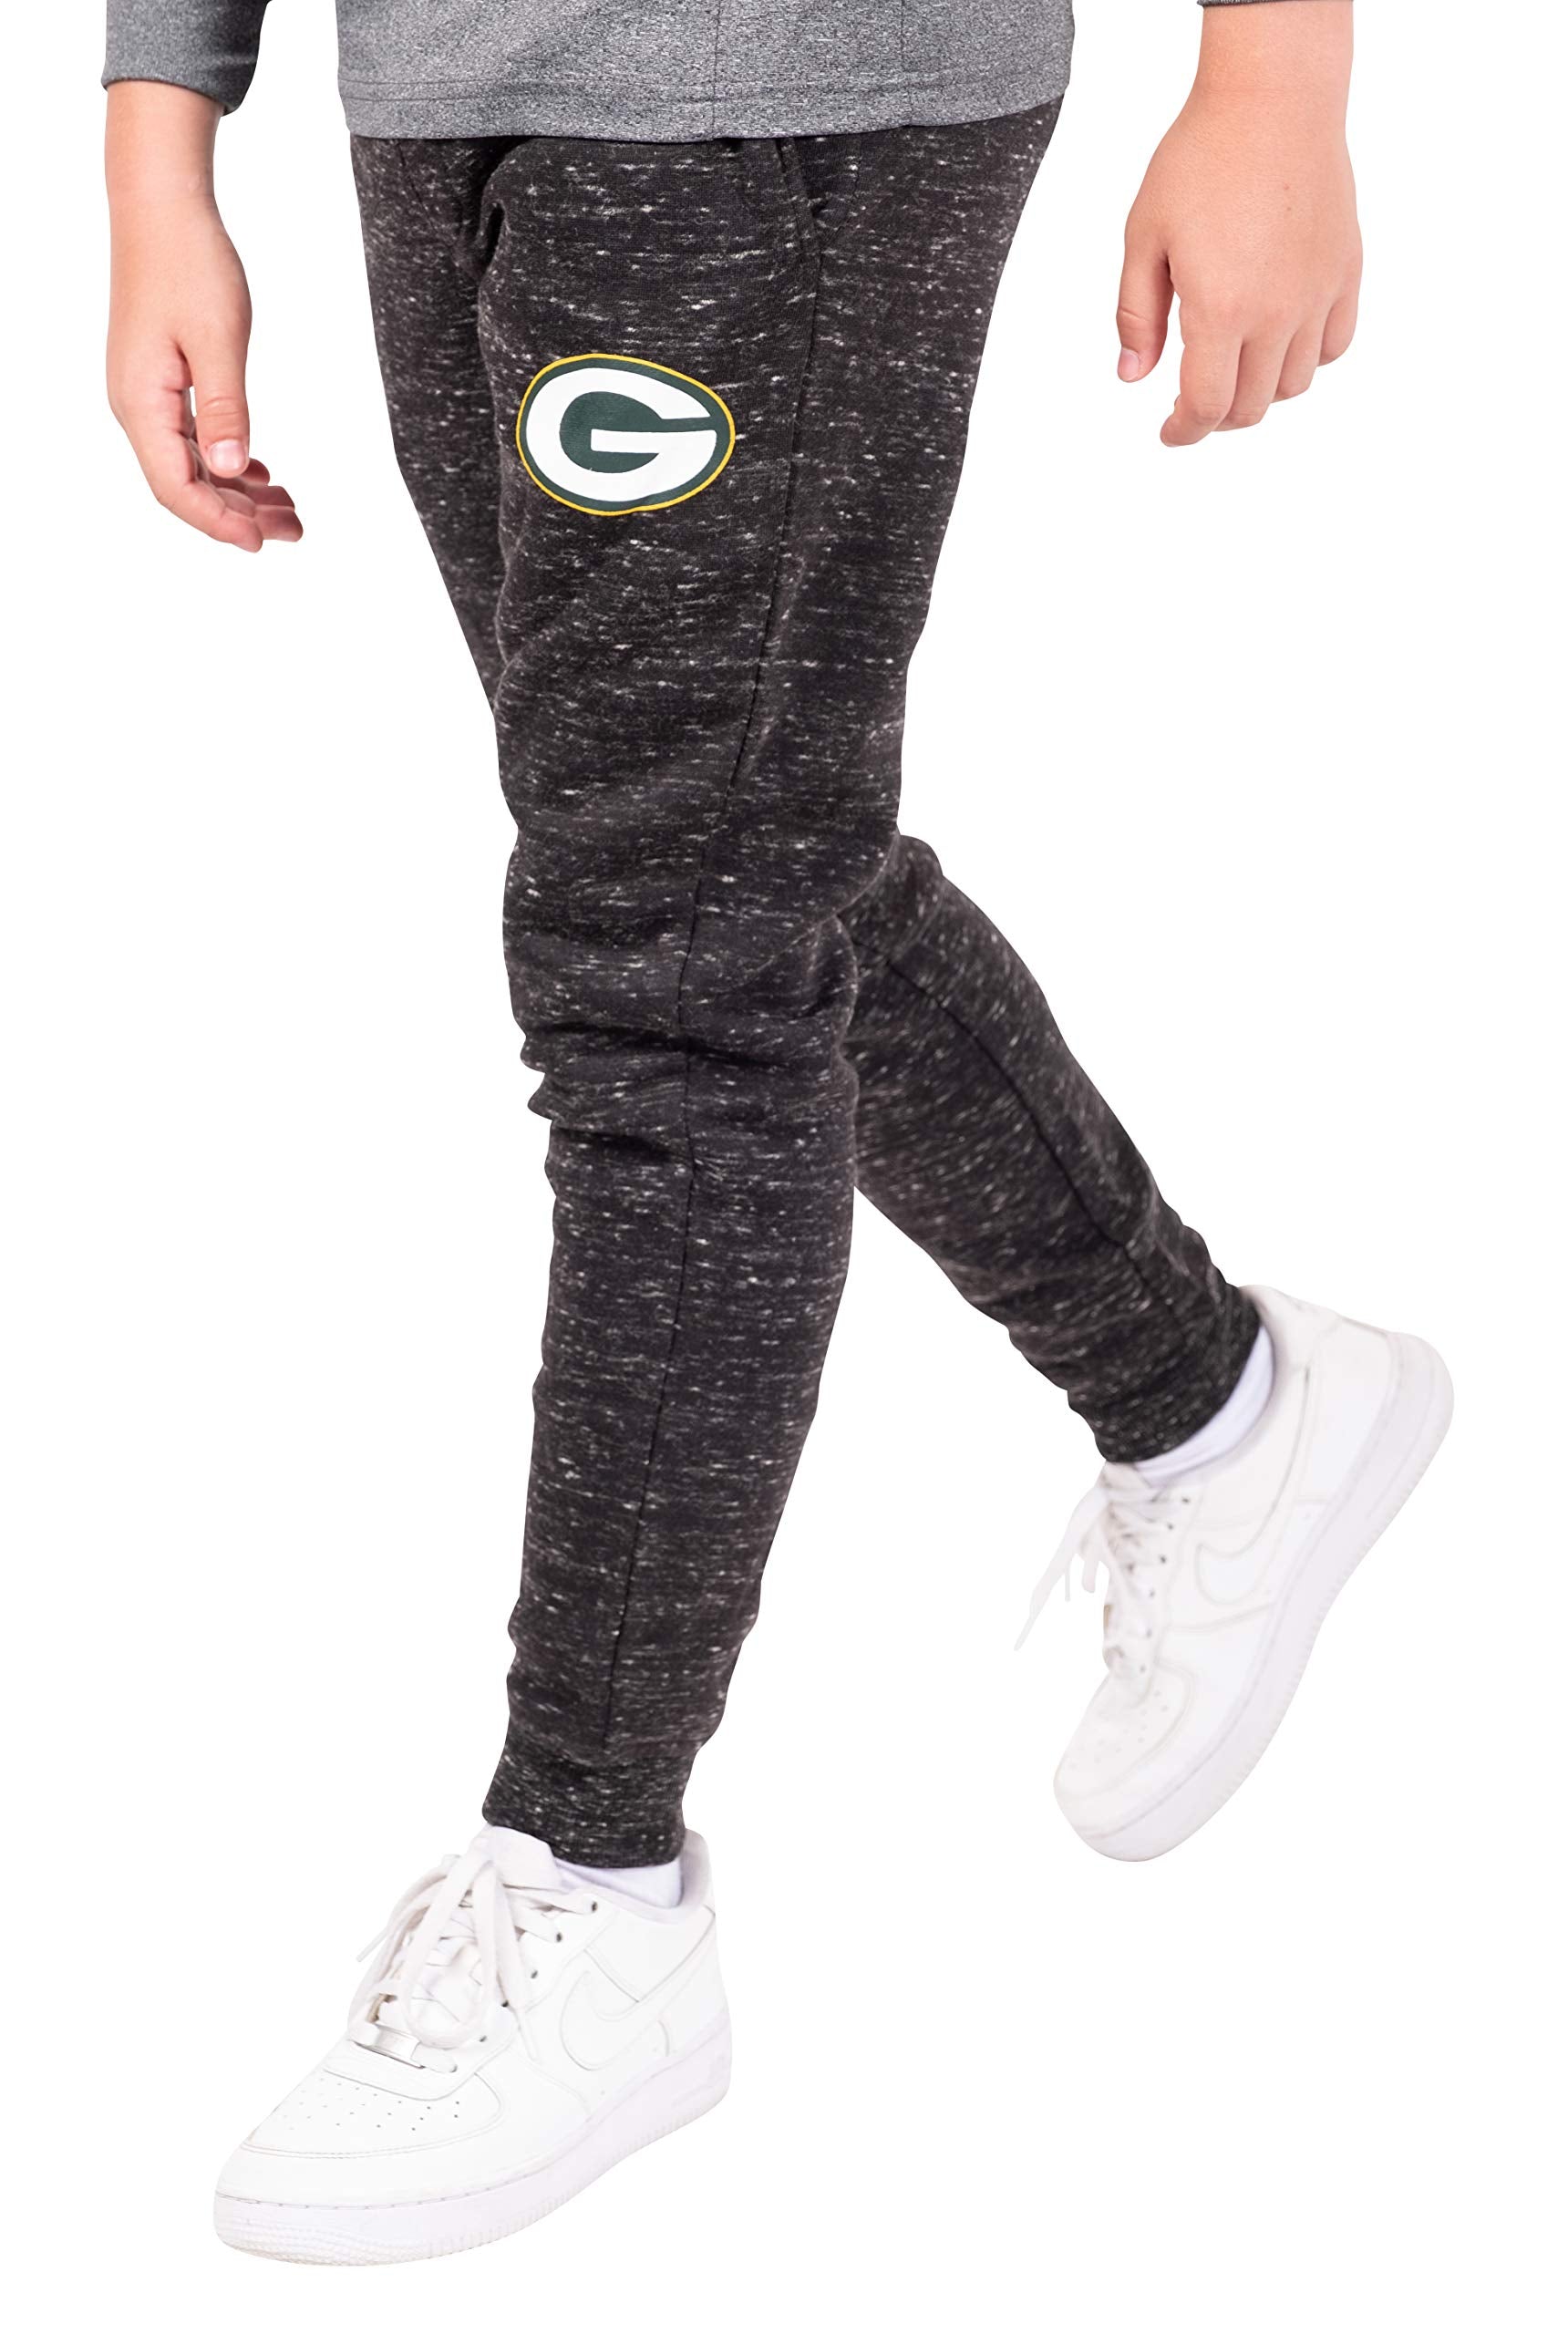 Ultra Game NFL Green Bay Packers Youth Extra Soft Black Snow Fleece Jogger Sweatpants|Green Bay Packers